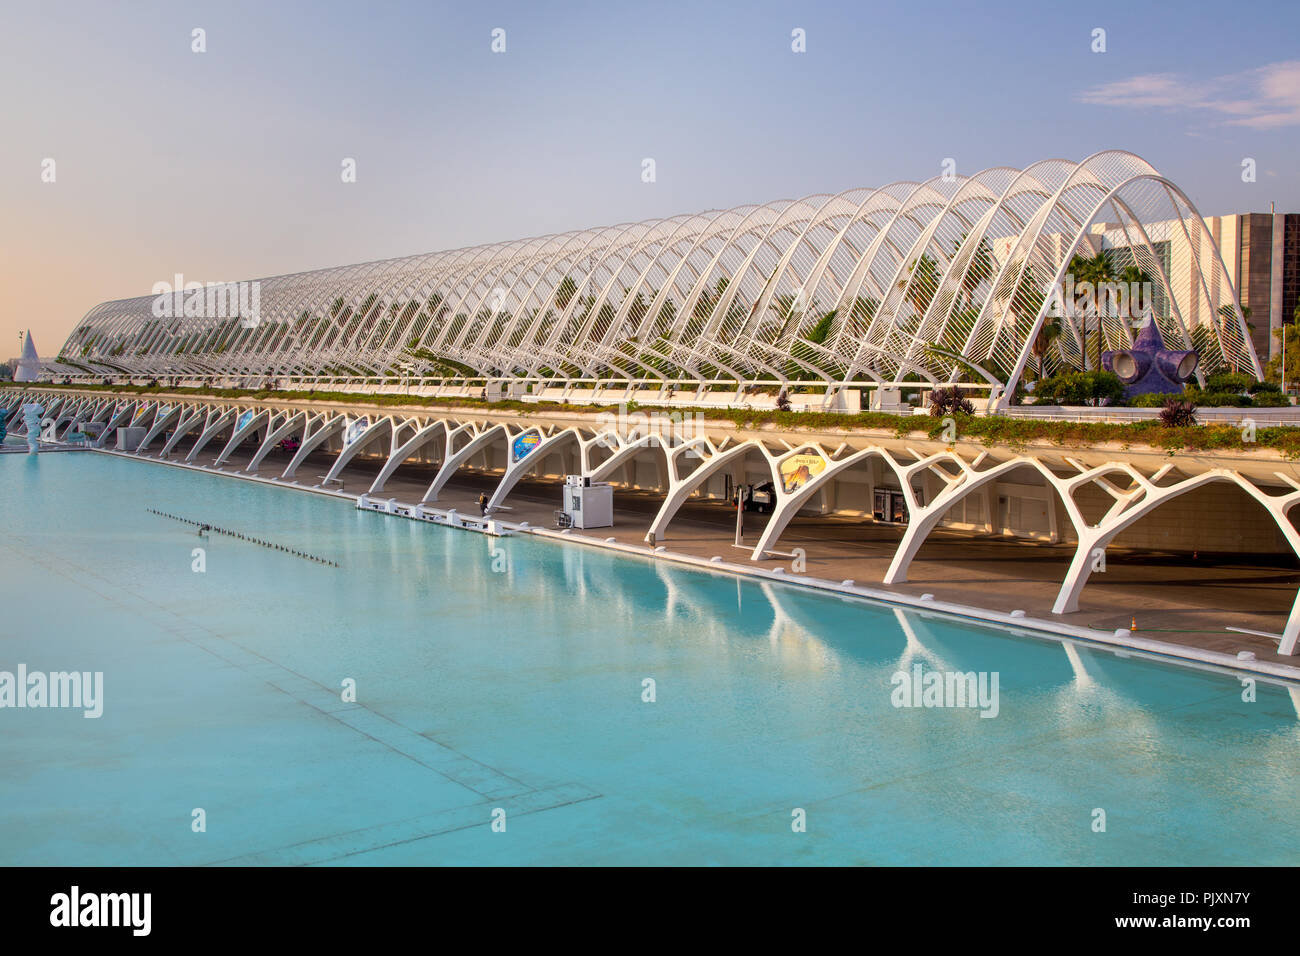 The Umbracle arched structure sculpture gallery in the City of Arts and Sciences in Valencia, Spain Stock Photo